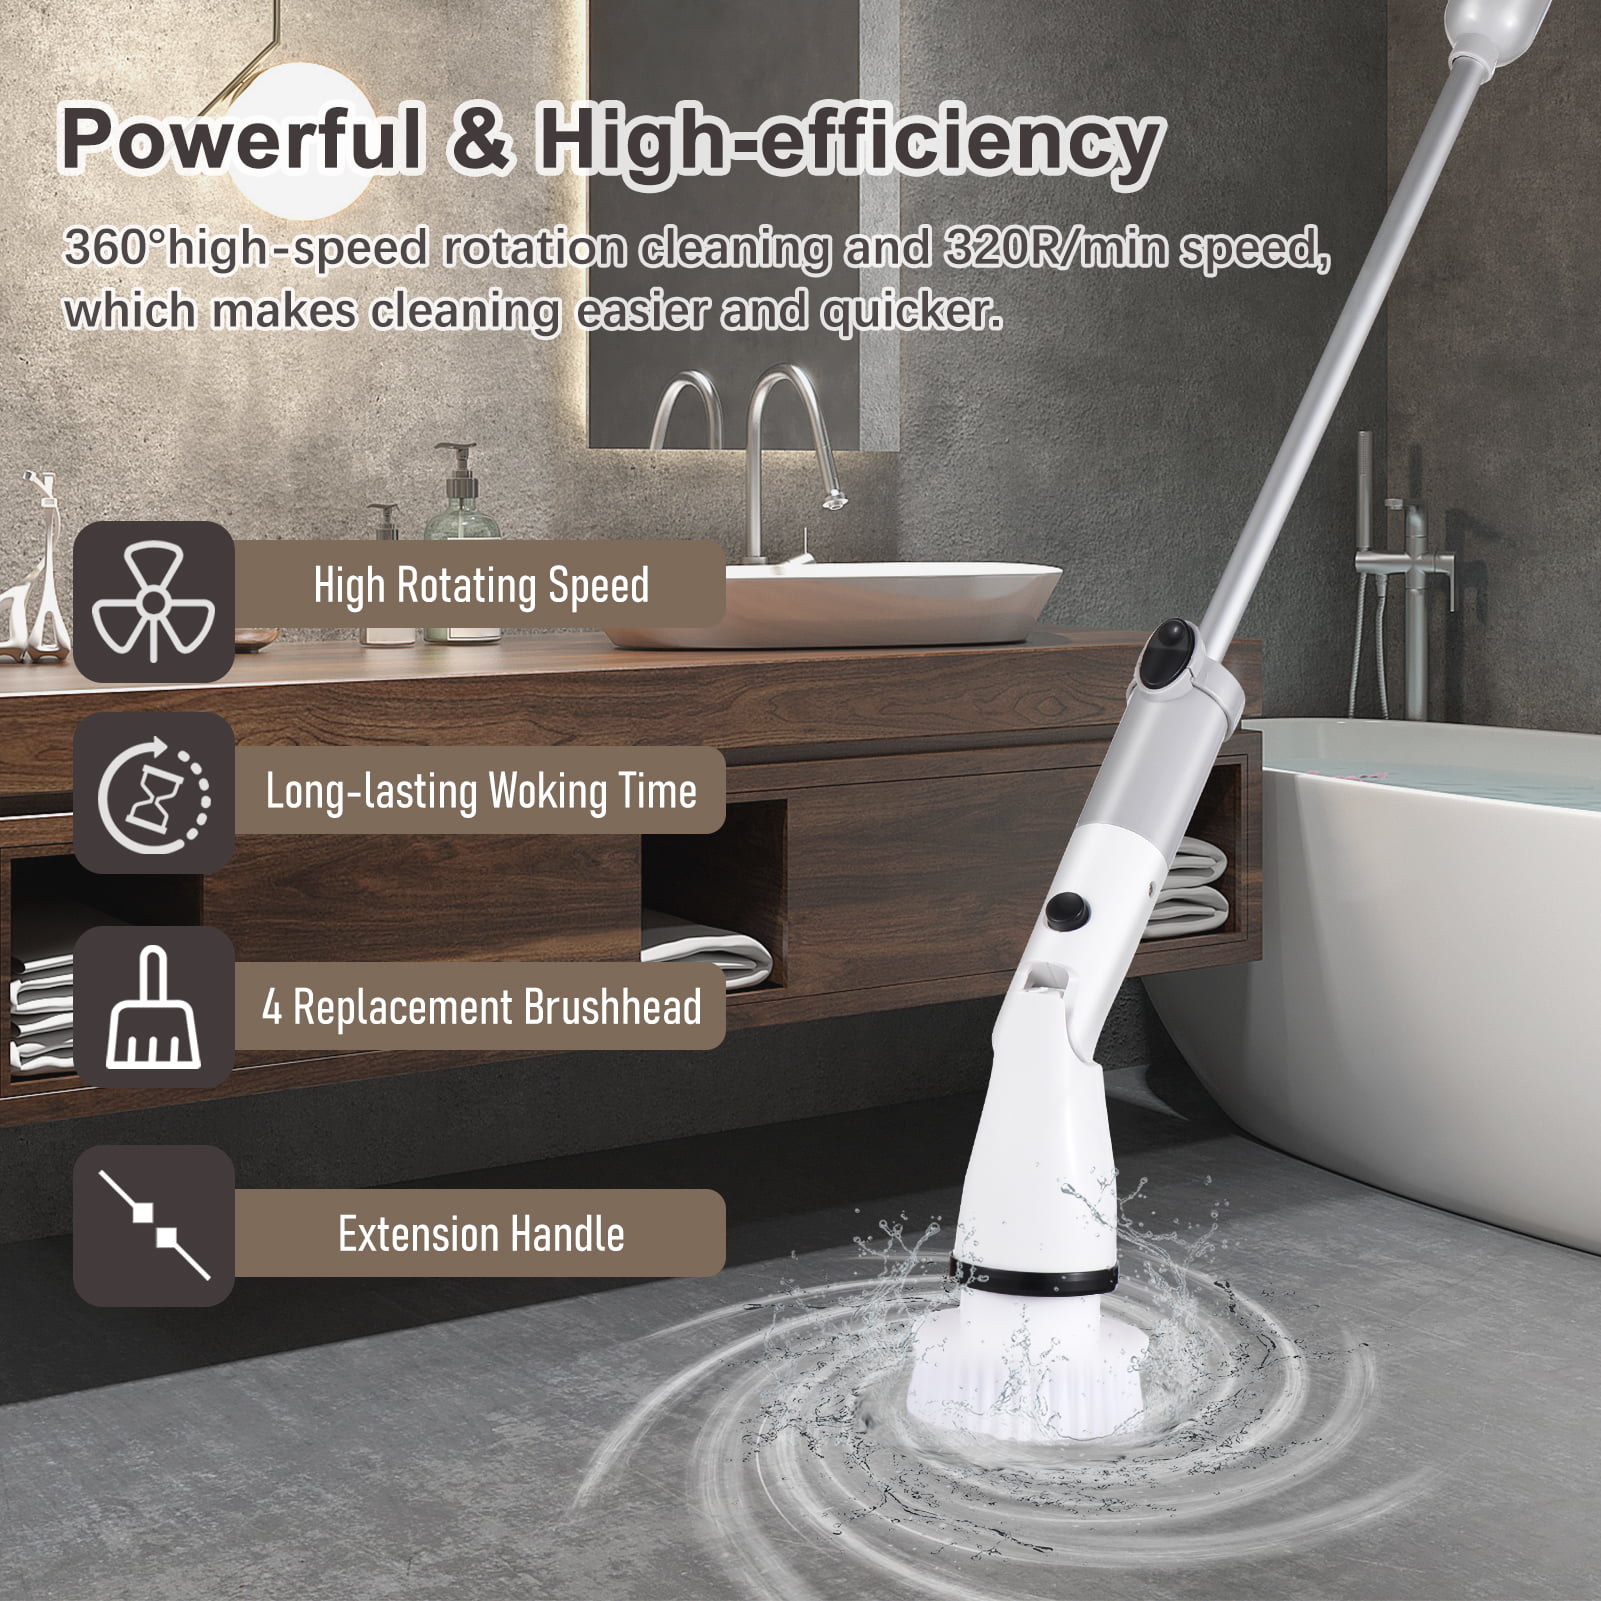 Electric Spin Scrubber 360 Cordless Bathroom Cleaning Brush with 4 Replaceable Scrubber Brush Heads Extension Handle for Tub, Tile, Wall, Bathroom - image 5 of 10